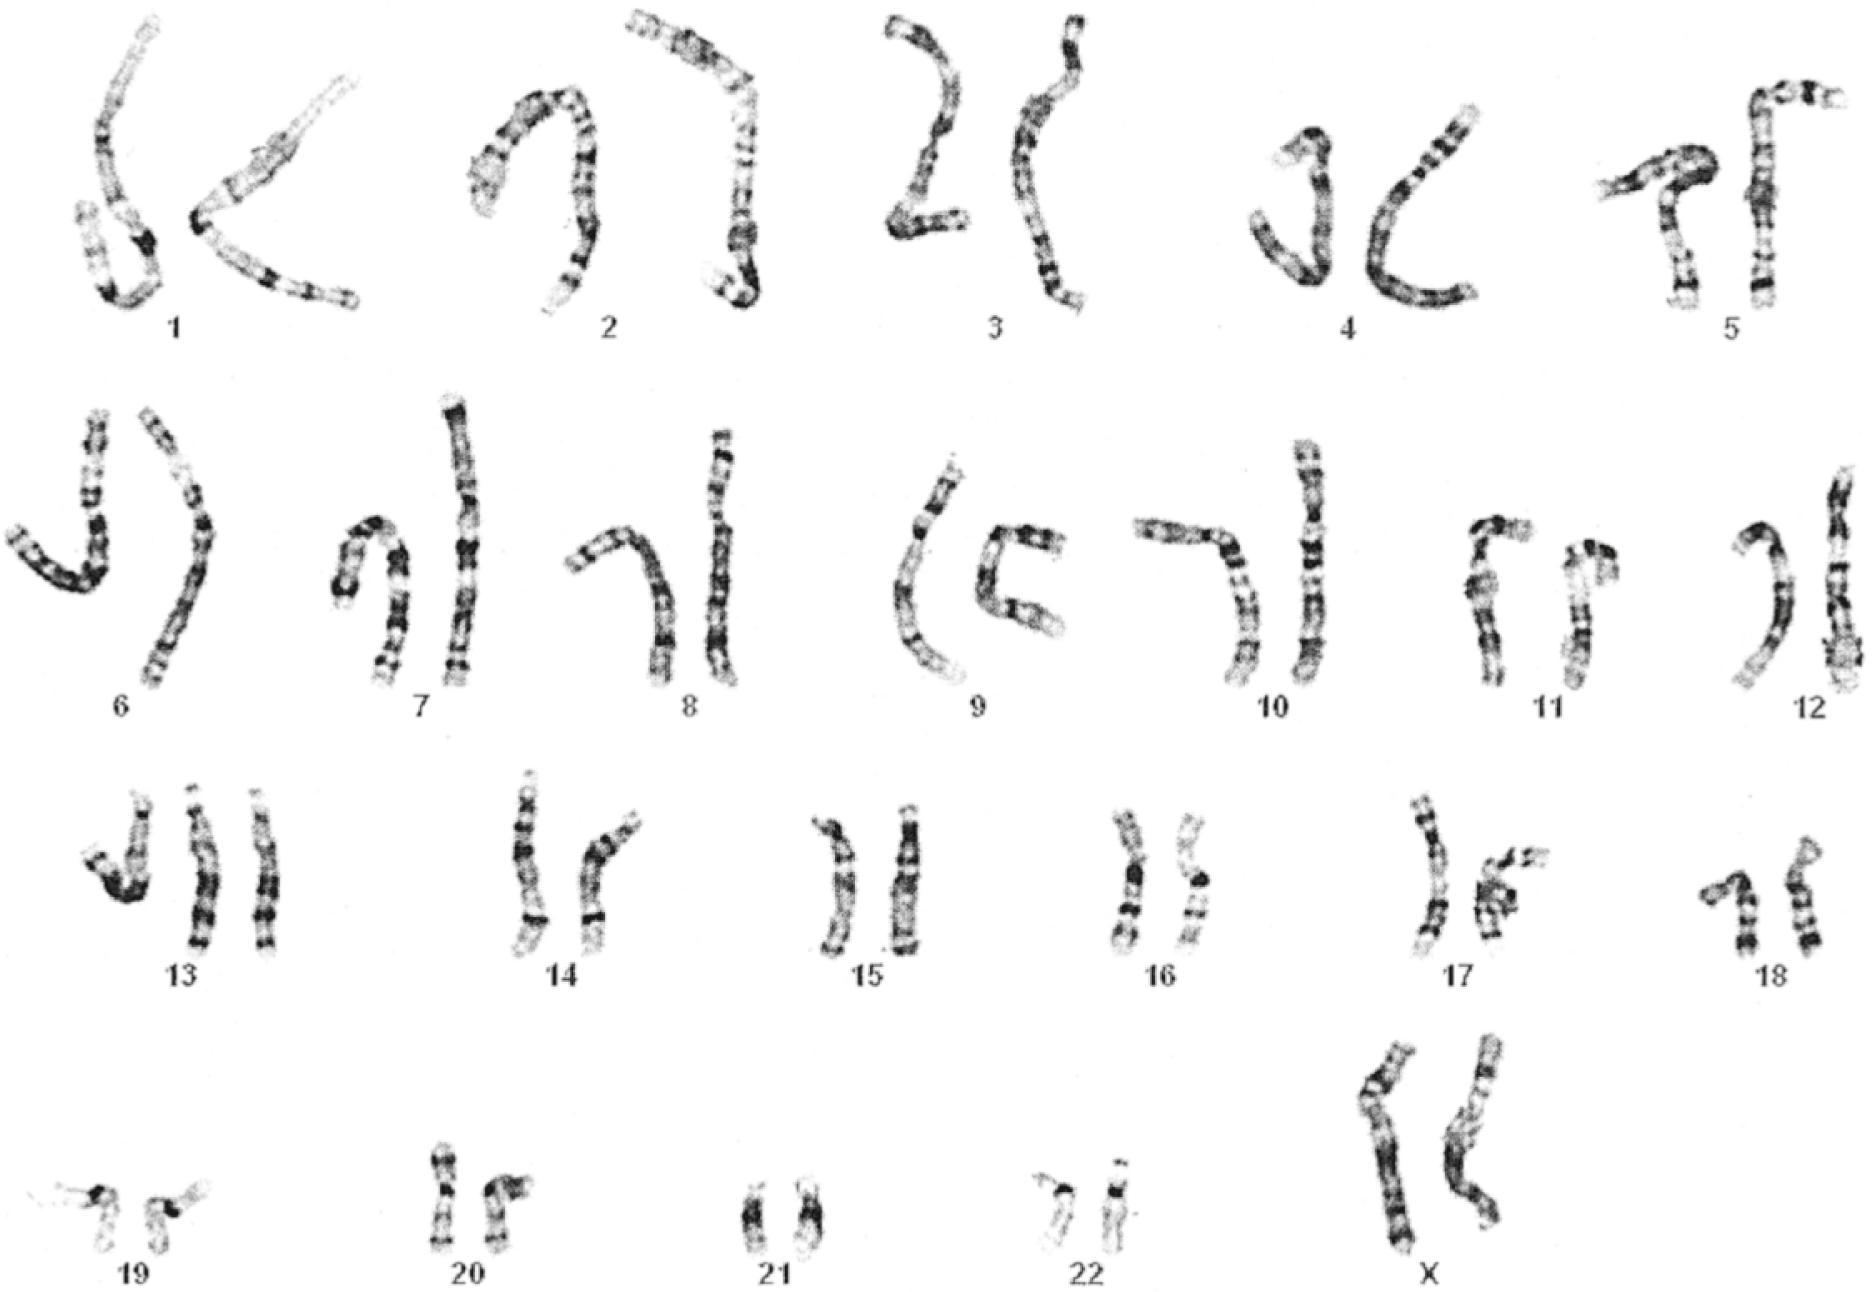 Fig. 1.8, Karyotype of a patient with trisomy 13 demonstrates aneuploidy. Note the extra chromosome 13, causing the cell to have 47 instead of 46 chromosomes.